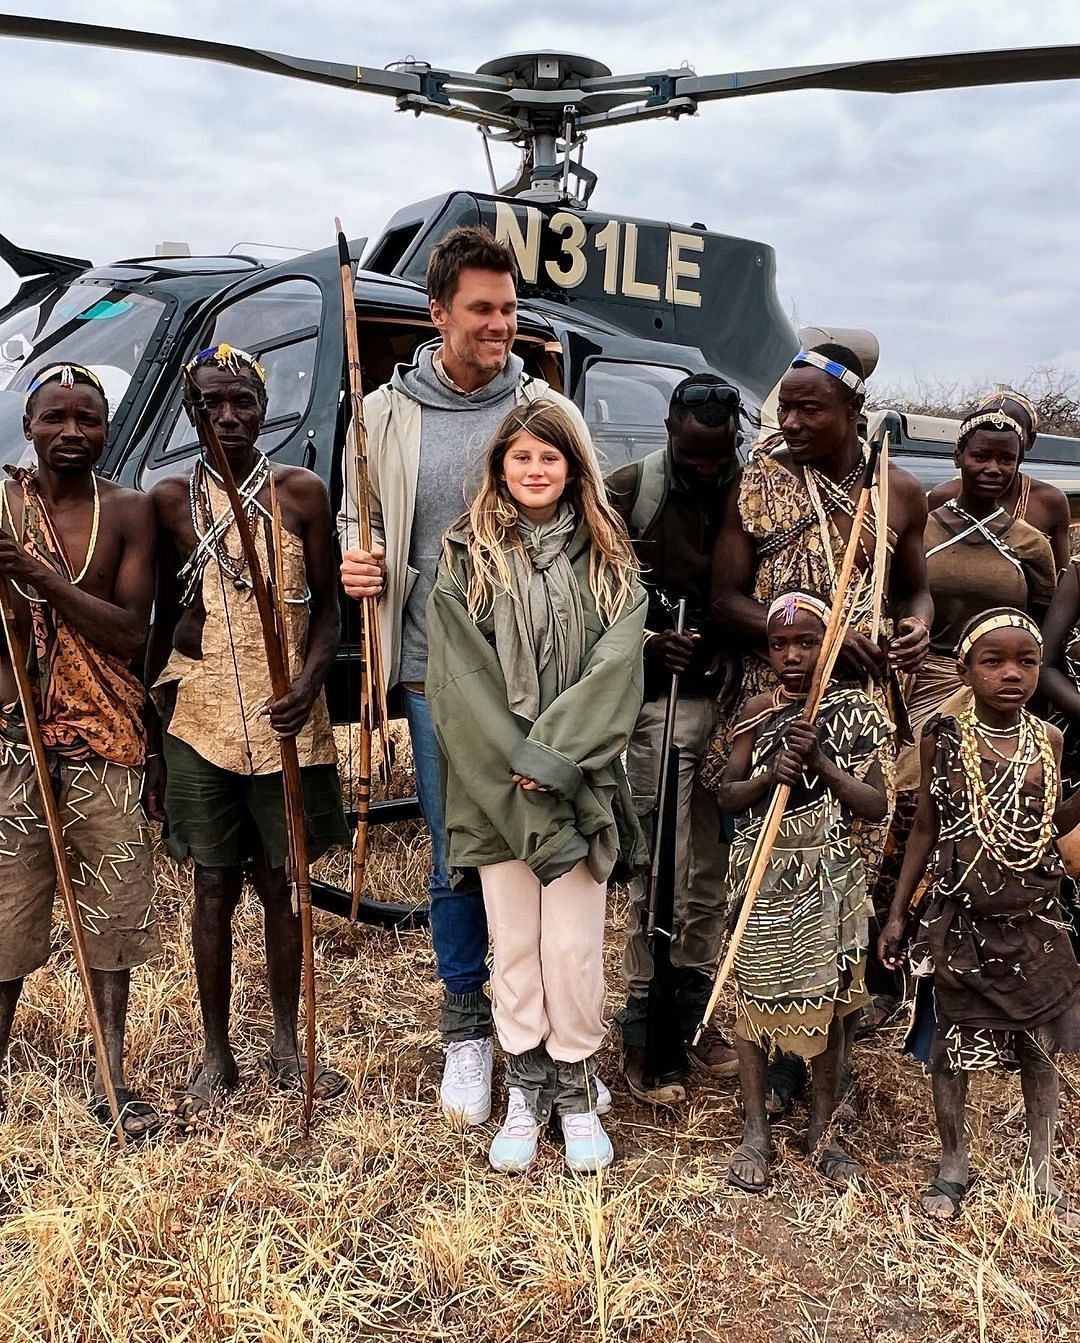 Tom Brady with his daughter Vivian on a vacation in Africa. (Tom Brady/IG)